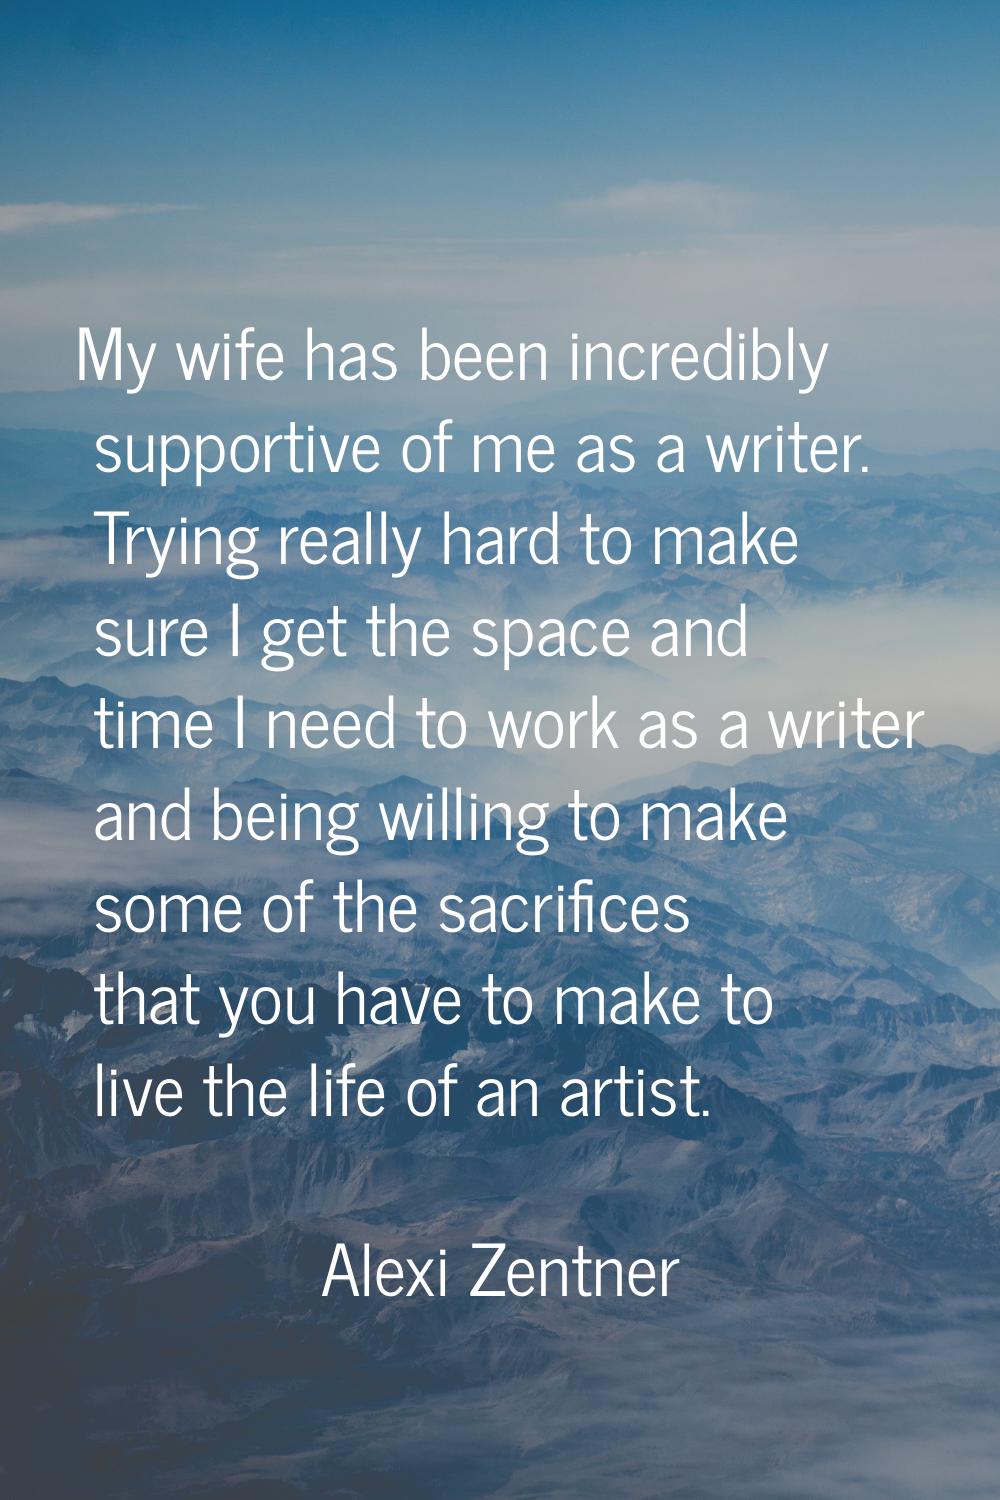 My wife has been incredibly supportive of me as a writer. Trying really hard to make sure I get the